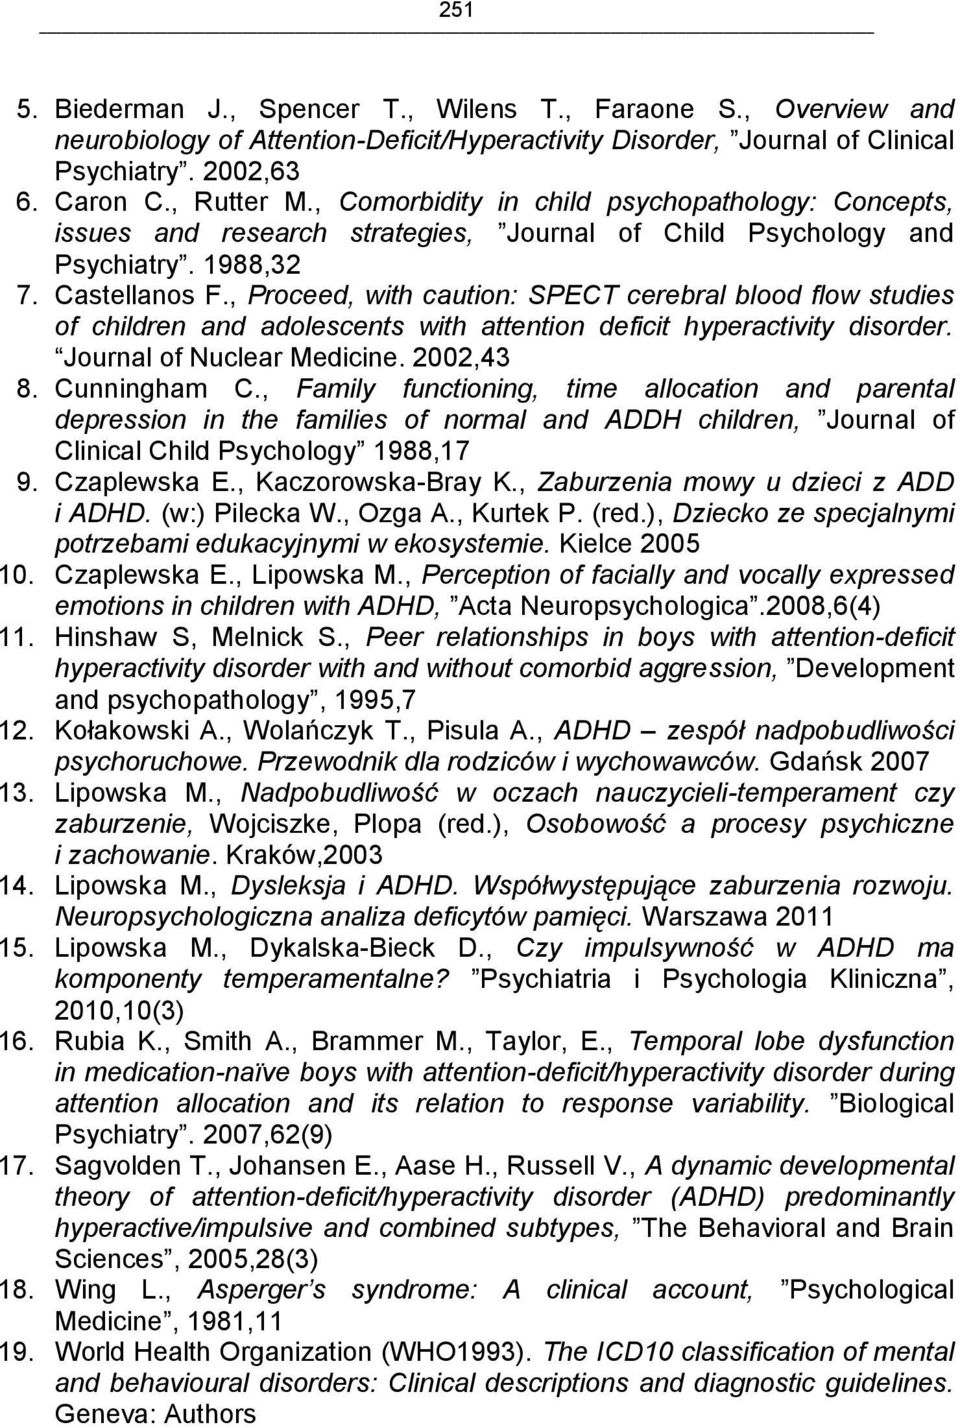 , Proceed, with caution: SPECT cerebral blood flow studies of children and adolescents with attention deficit hyperactivity disorder. Journal of Nuclear Medicine. 2002,43 8. Cunningham C.